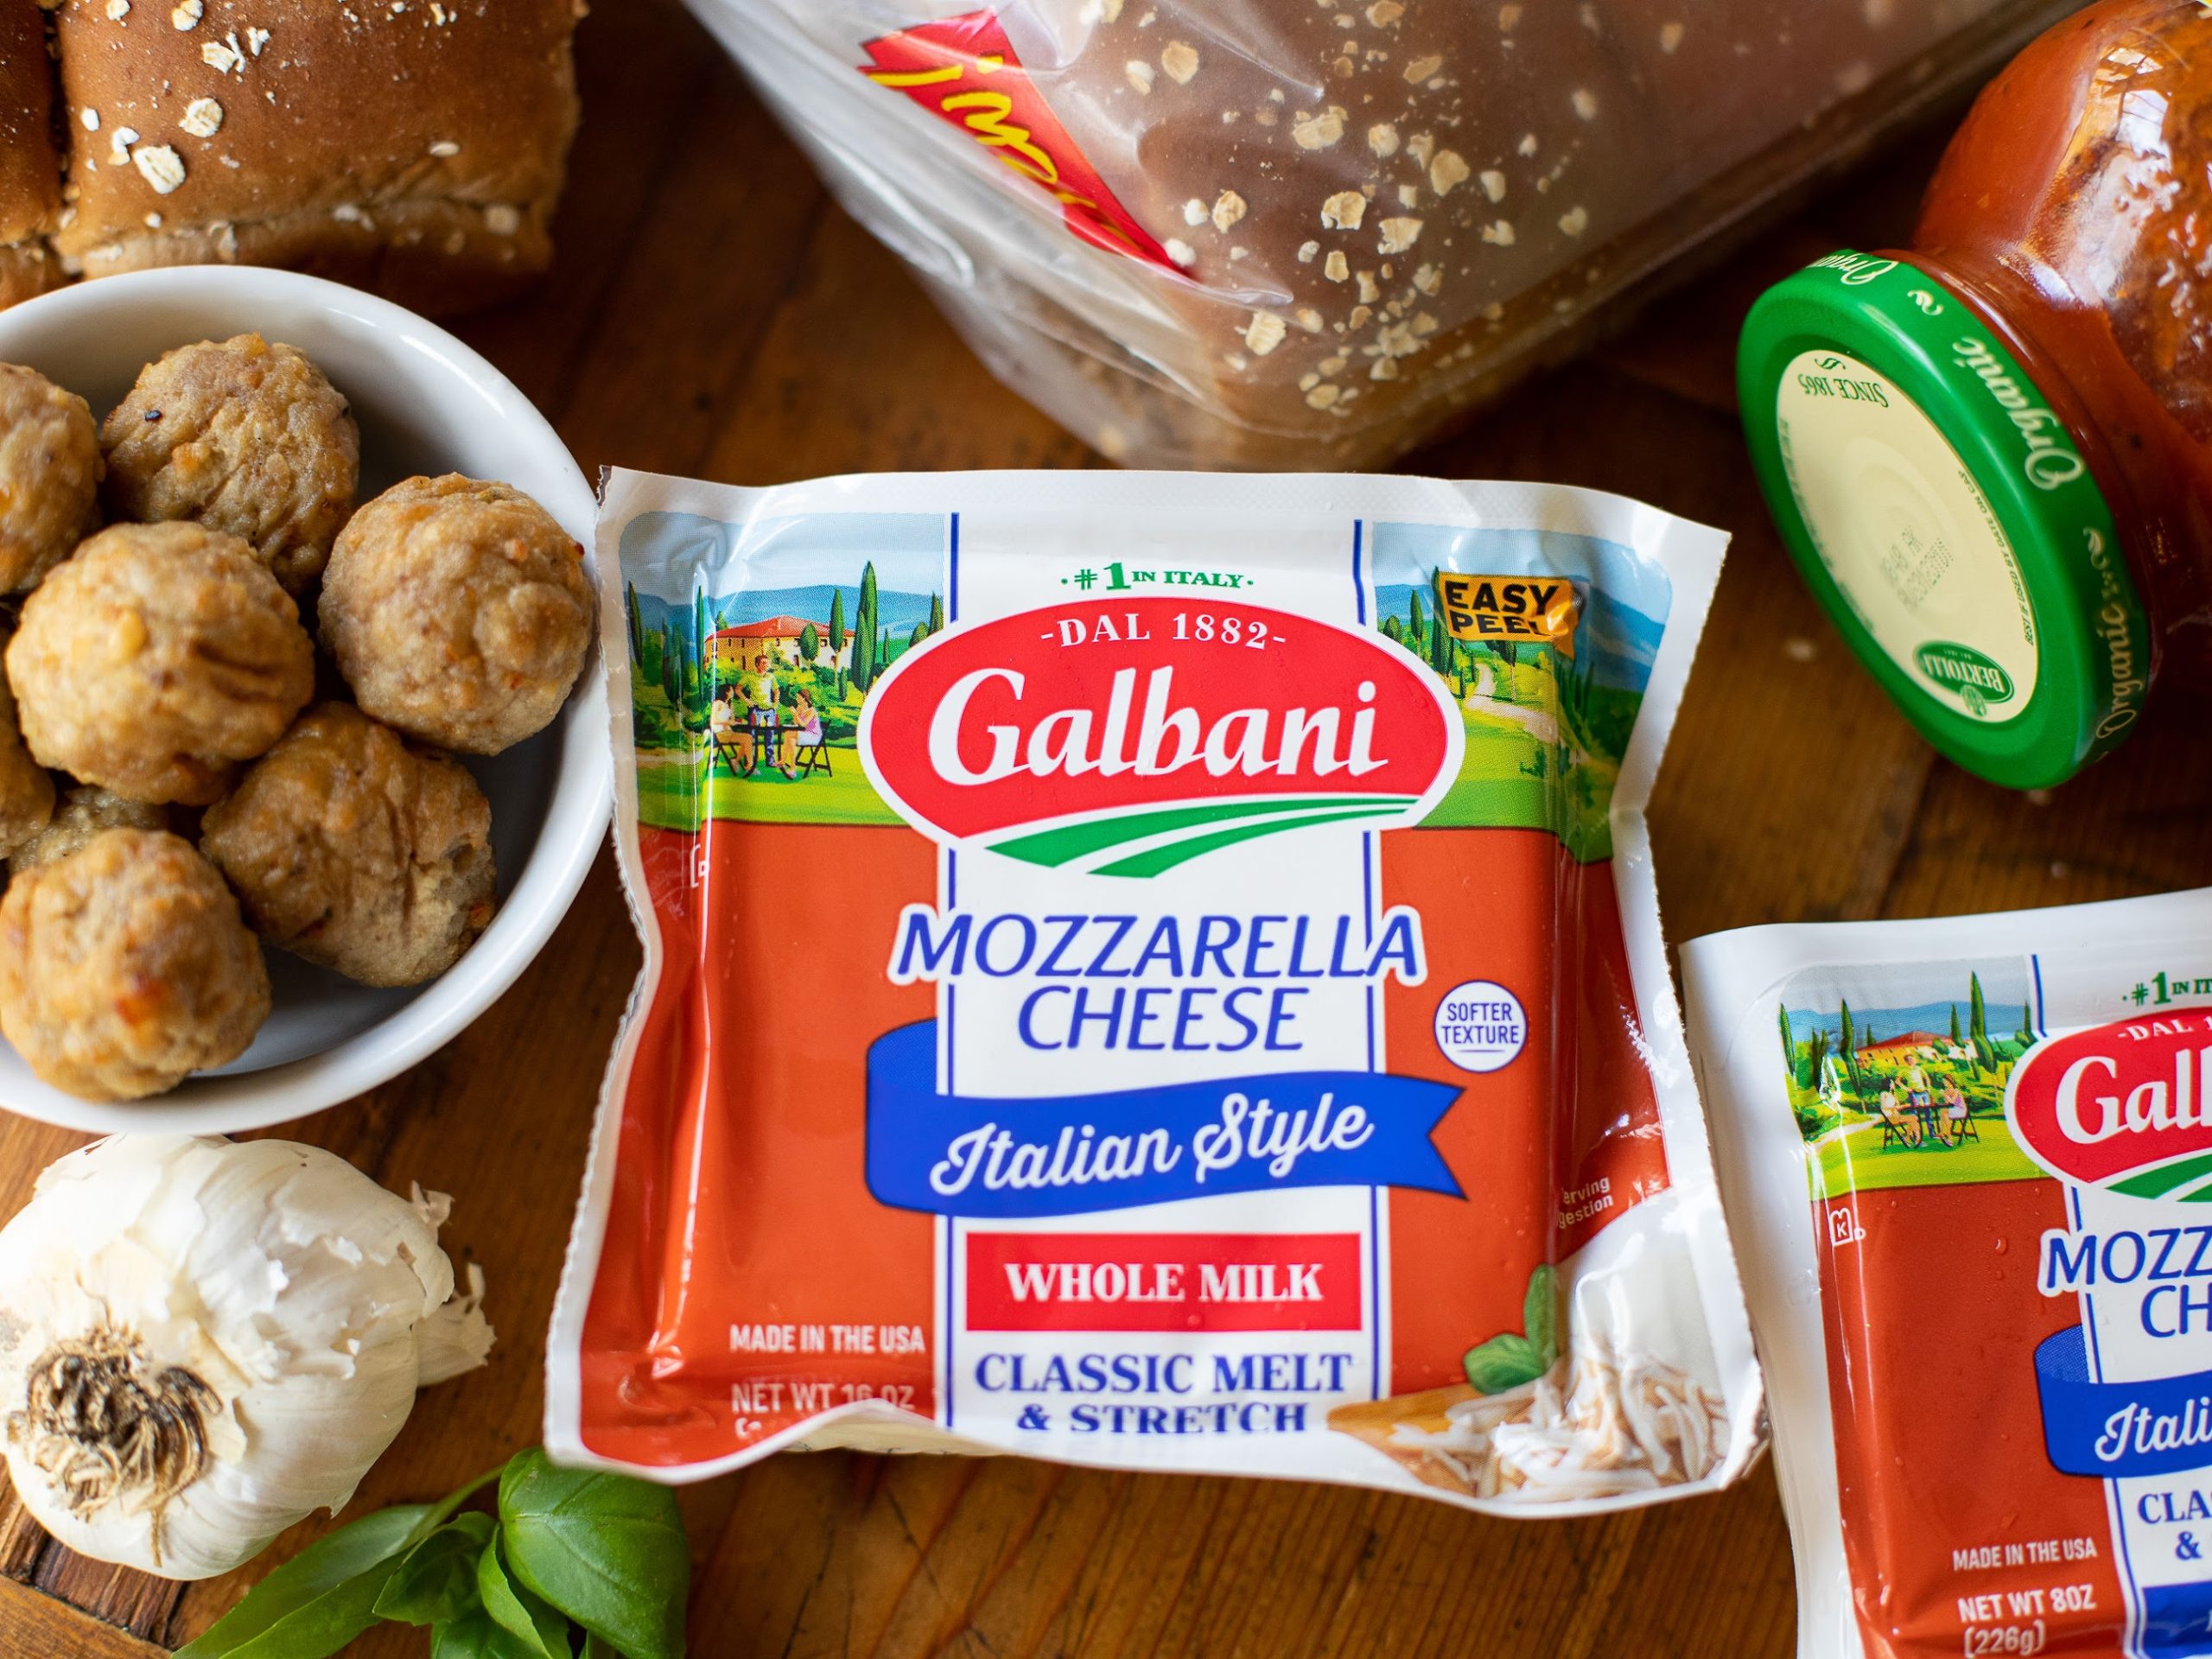 Need A Tasty App In A Flash? Try Fresh Mozzarella Grilled Crostini Made With Galbani Cheese on I Heart Publix 5